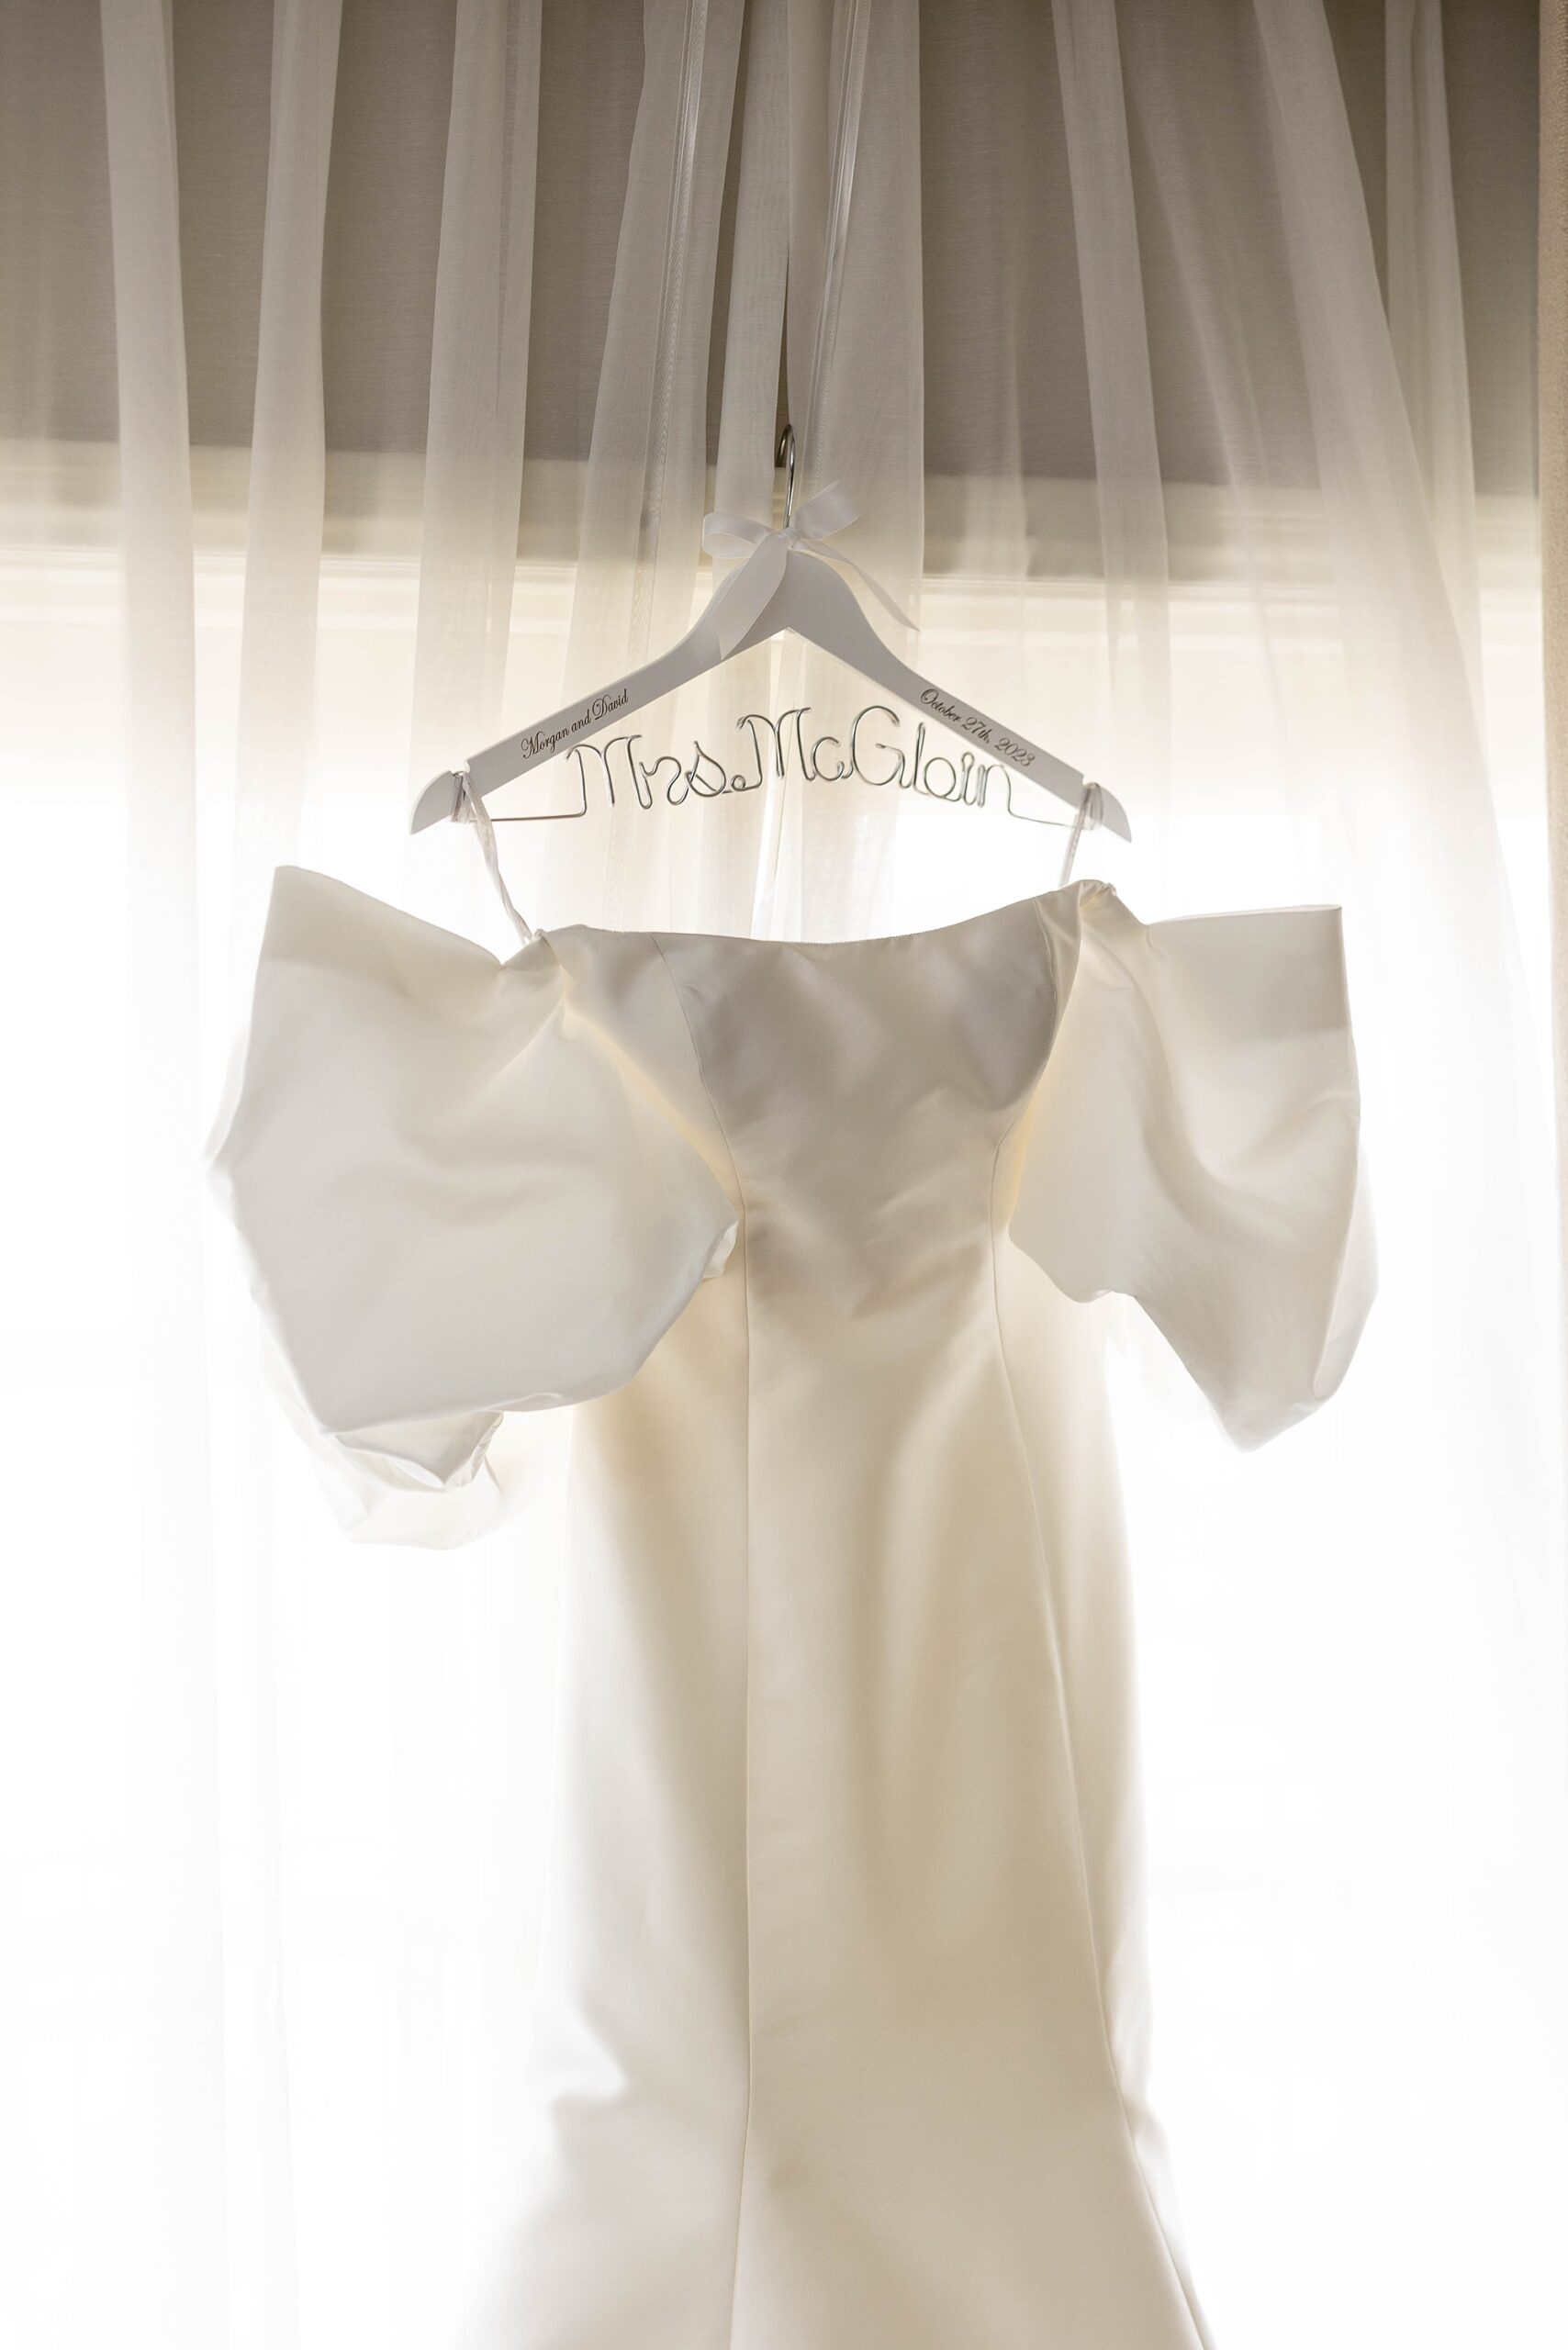 off-the-shoulder wedding gown with puffy sleeves hangs in front of white curtains 